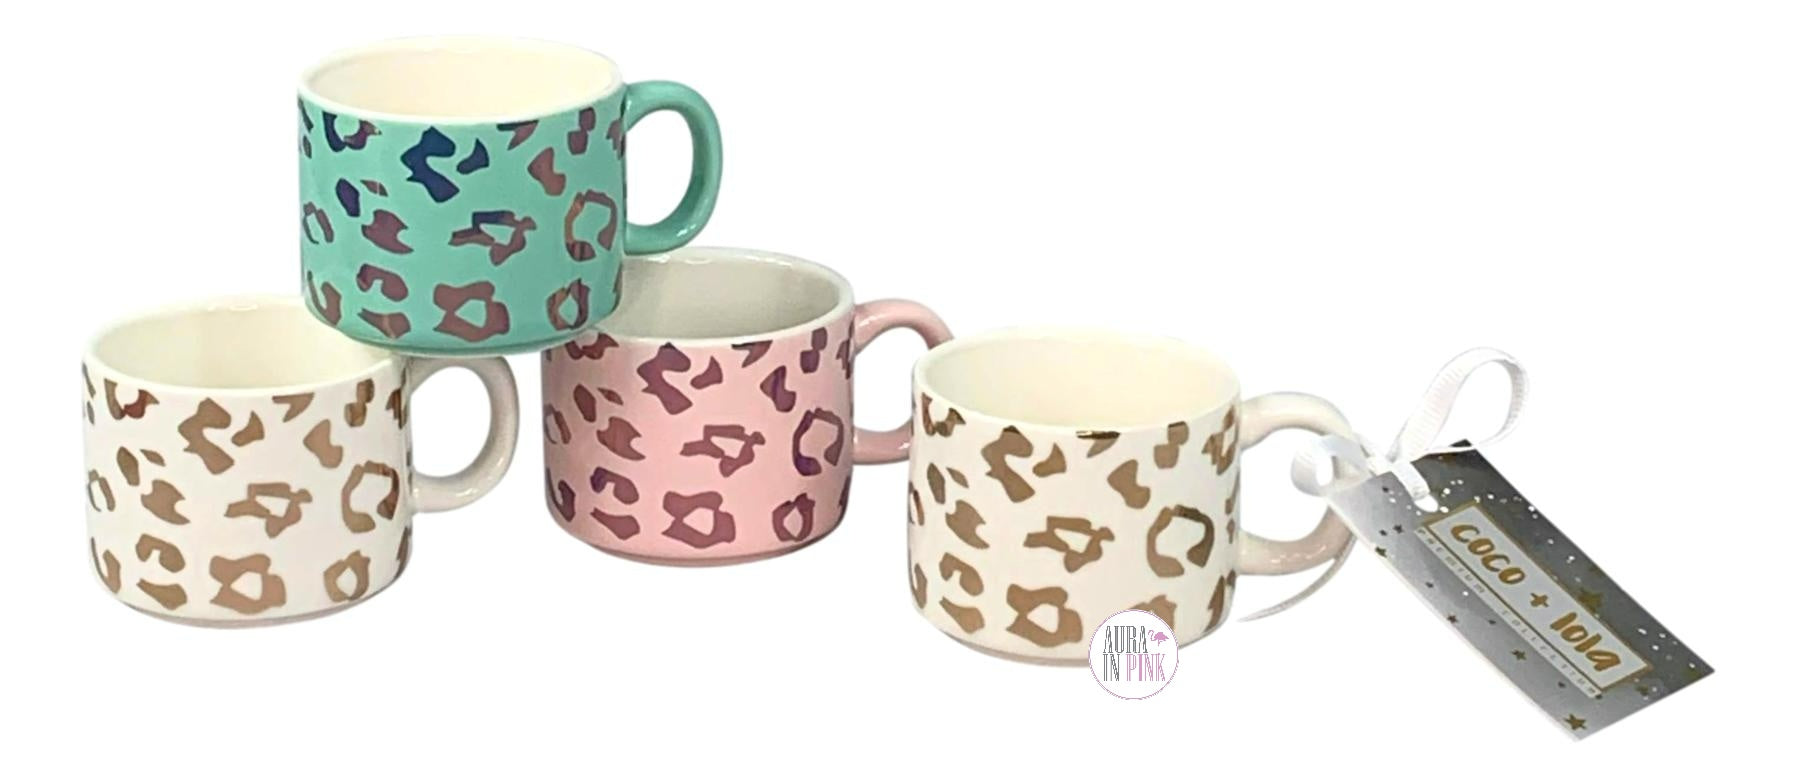 Stackable Espresso Cups 20 Oz Coffee Mugs 30th Anniversary Gifts